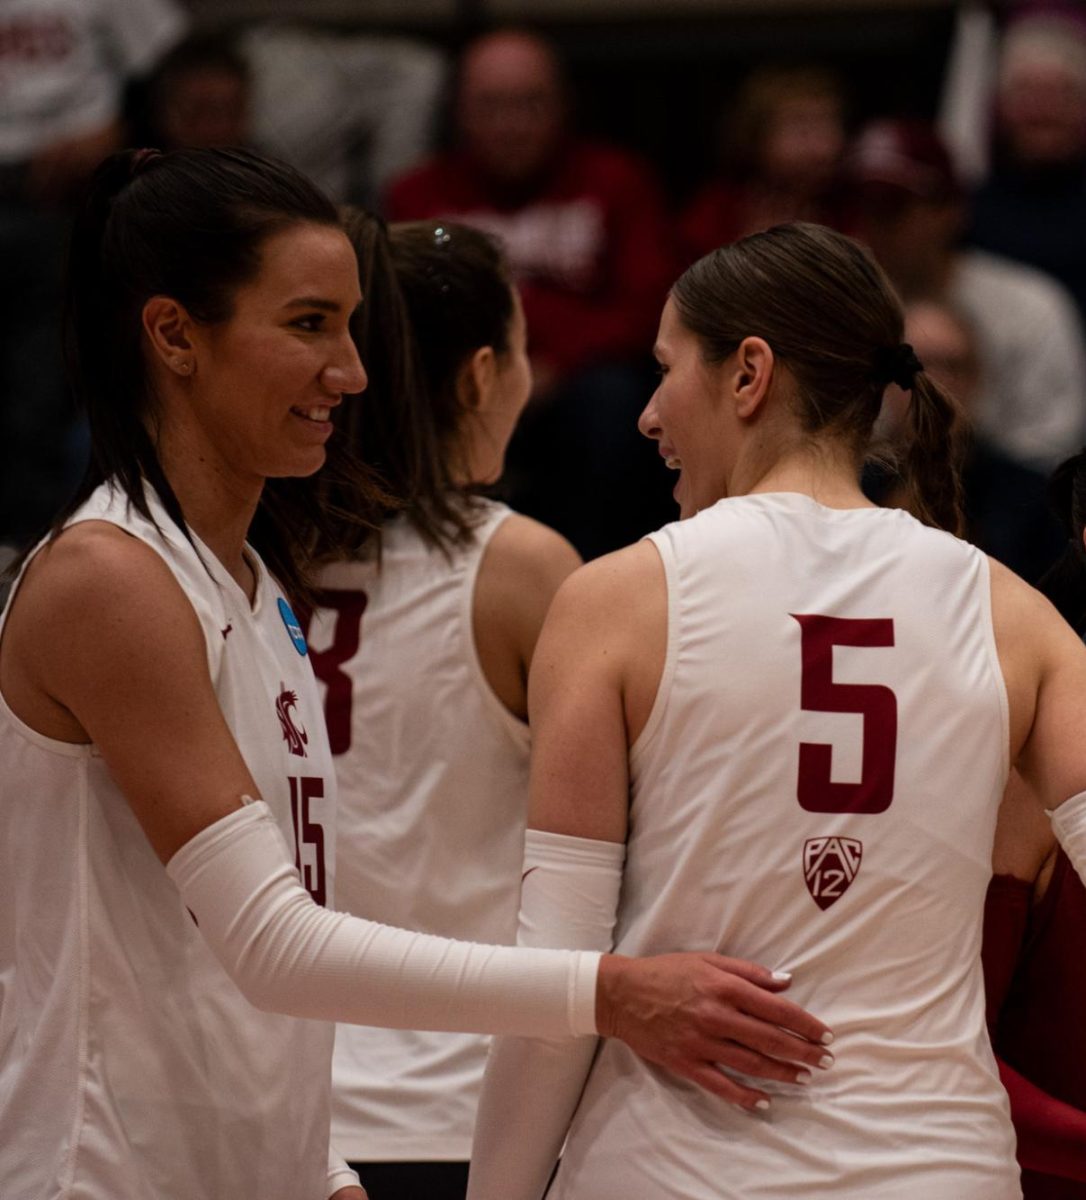 Magda+Jehl%C3%A1rov%C3%A1+and+Iman+Isanovic+share+a+moment+during+WSU+volleyballs+round+two+match+of+the+NCAA+Tournament+vs.+Dayton+Dec.+2+in+Pullman%2C+Wash.